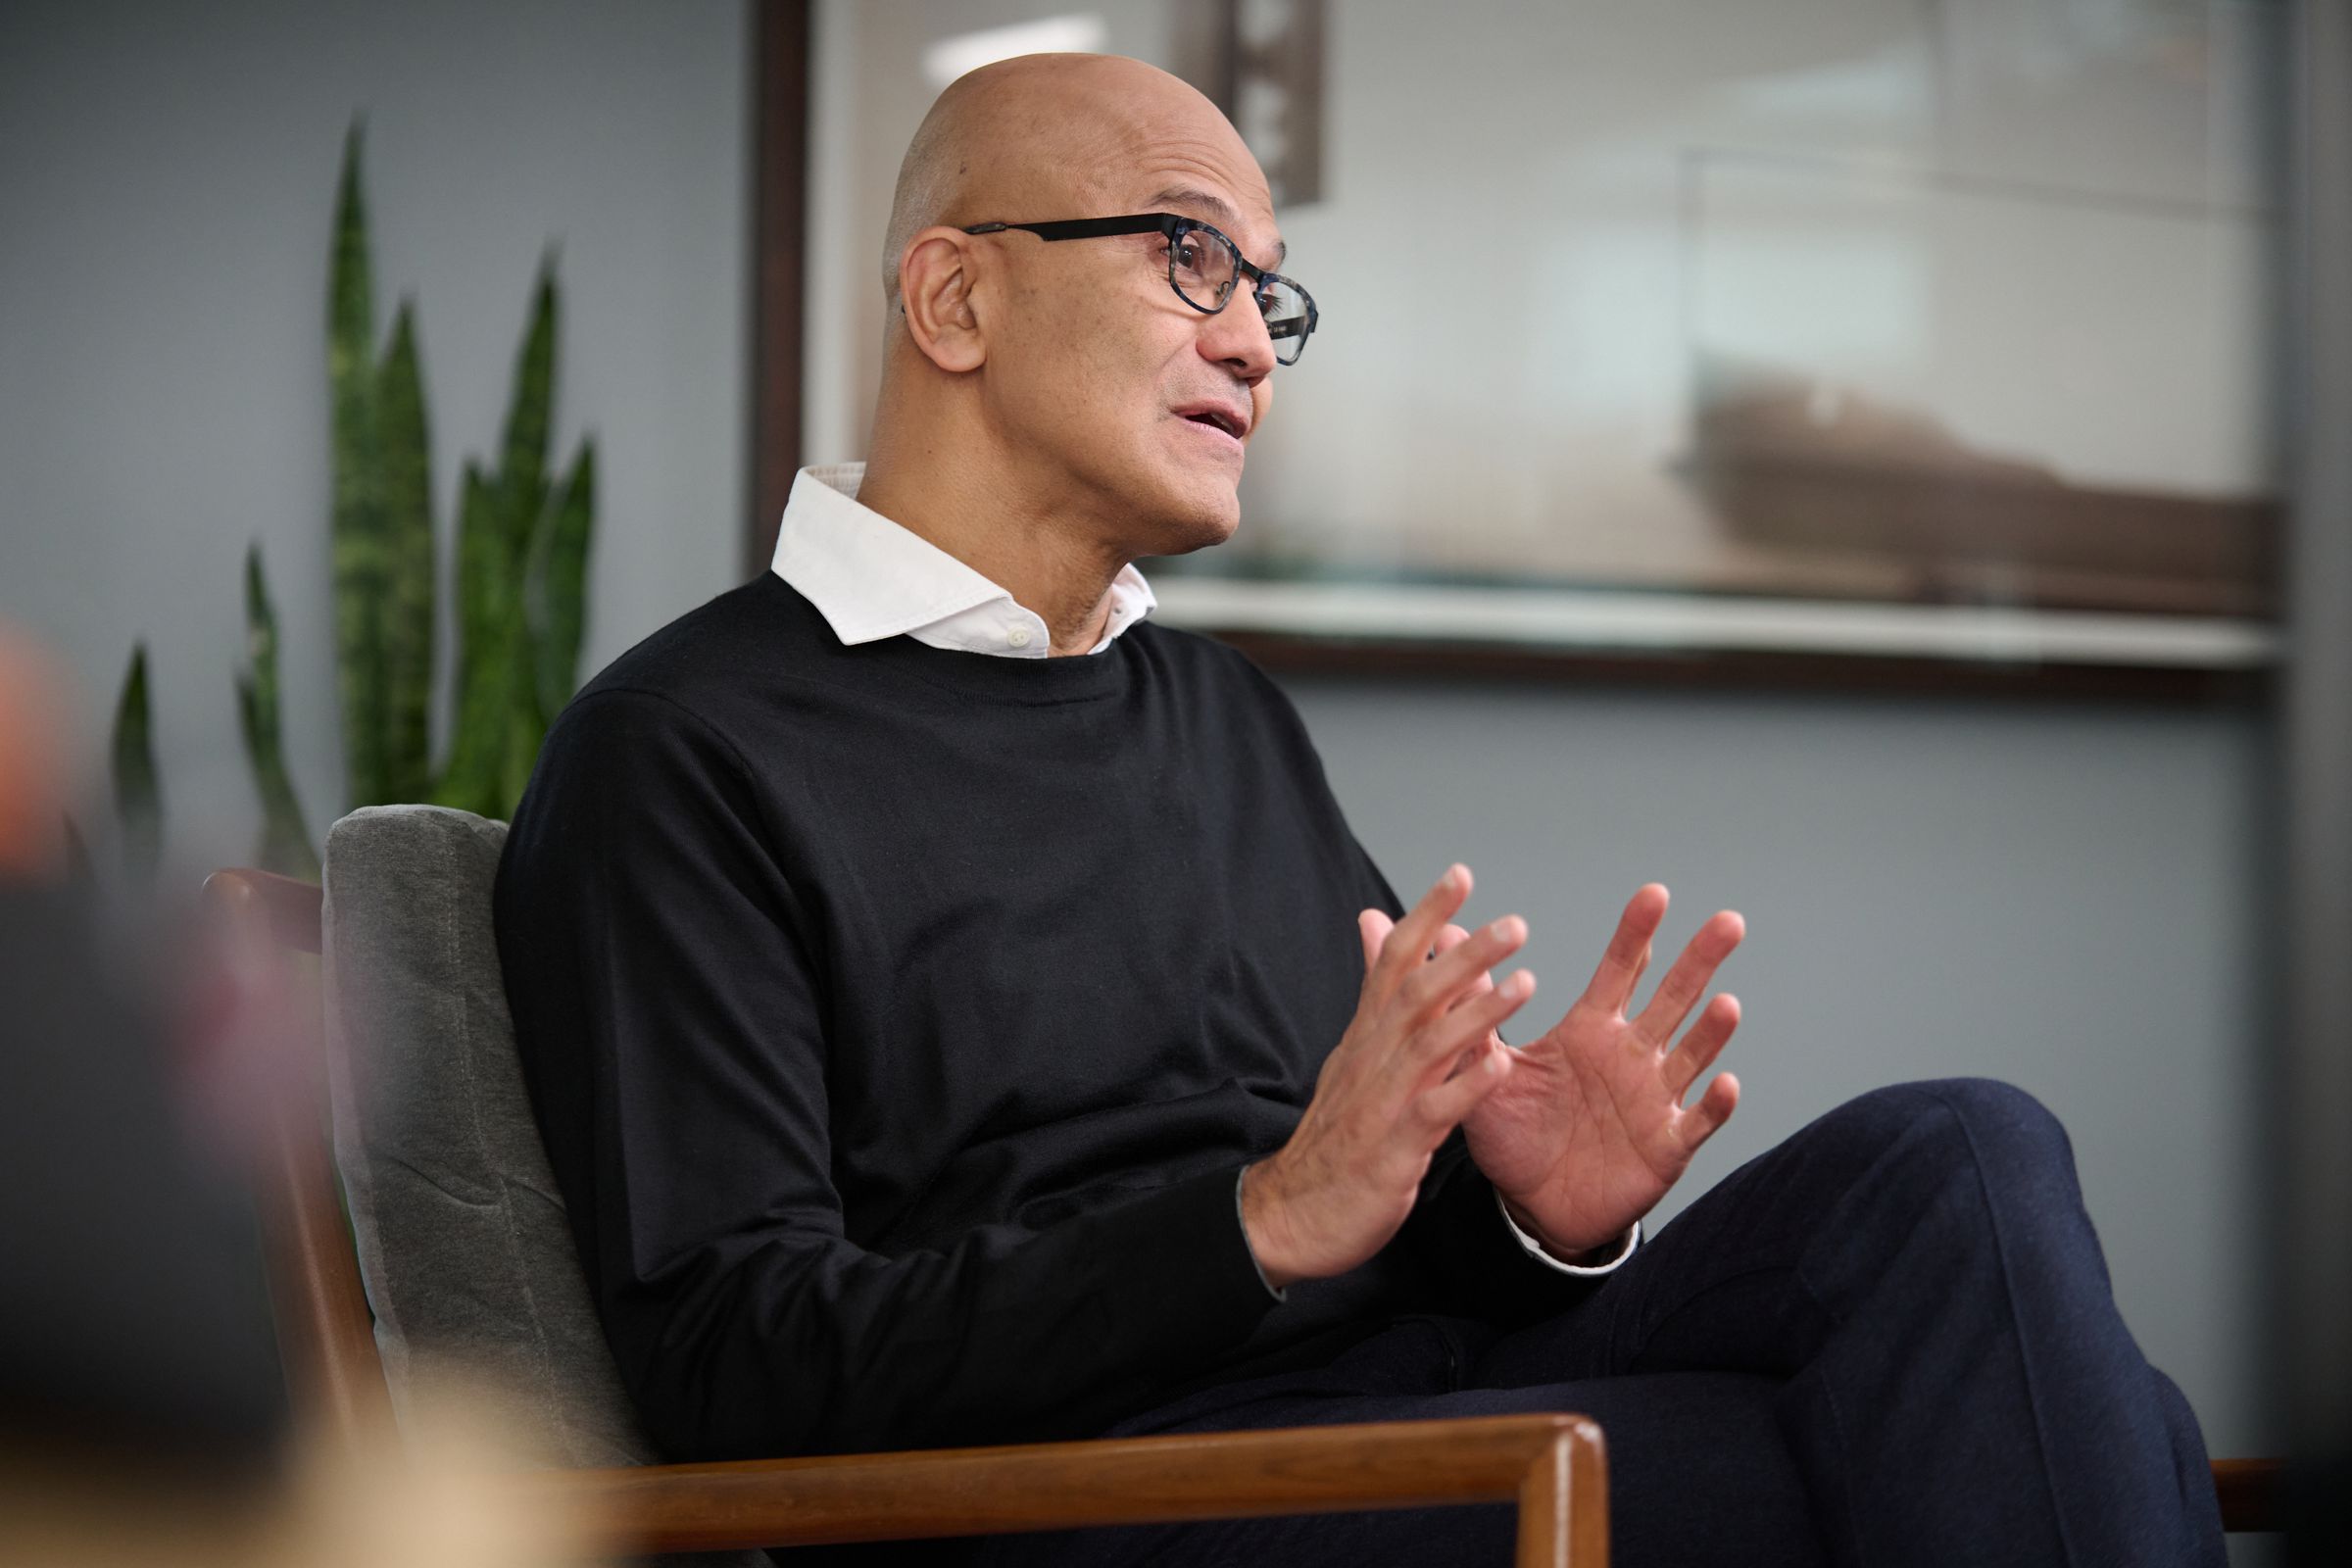 Microsoft is going nuclear to power its AI ambitions